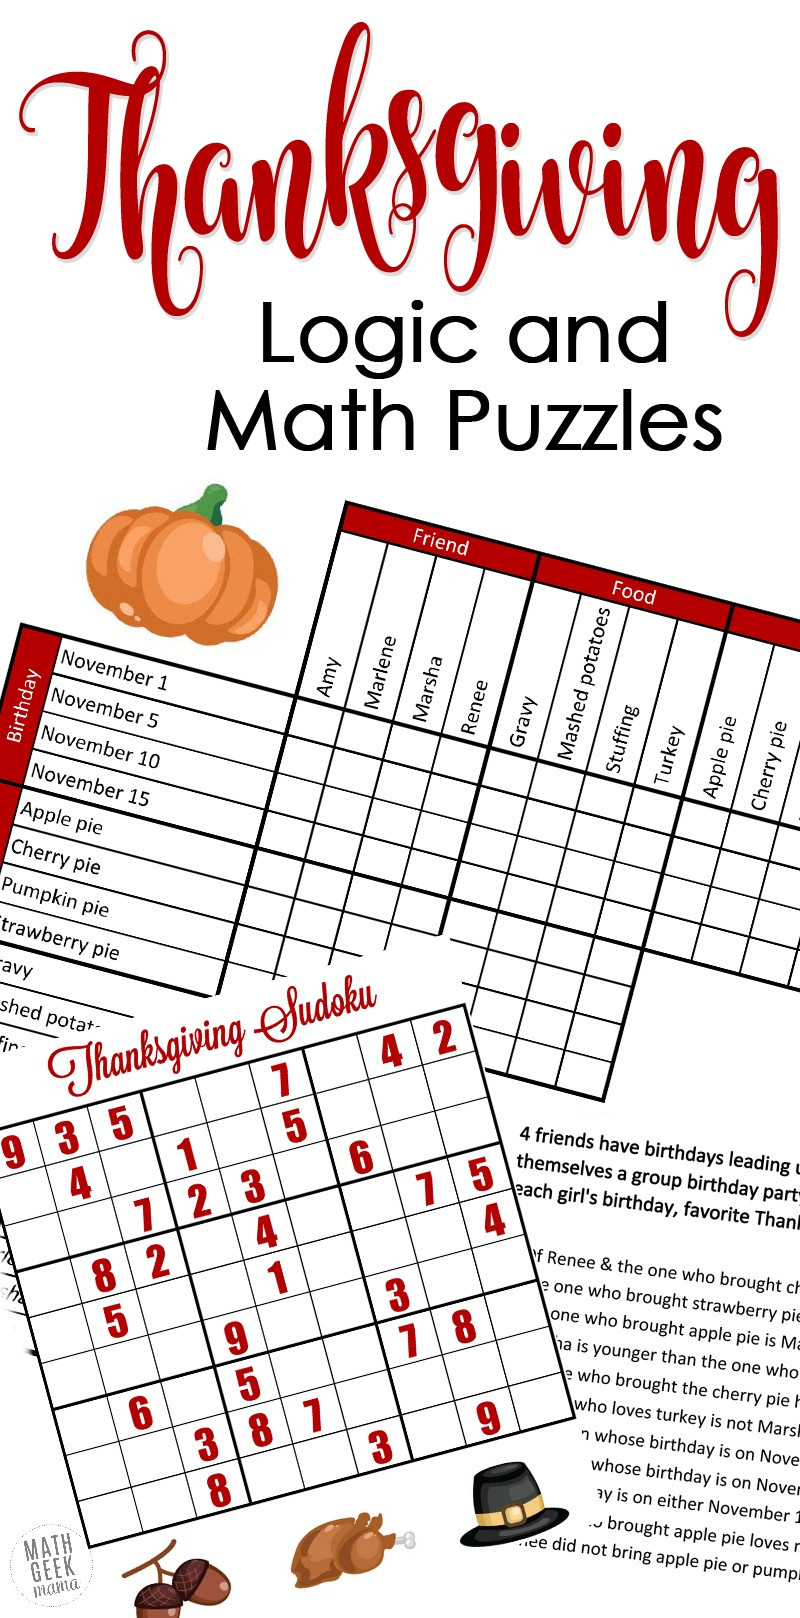 6th Grade Math Puzzles Printable Free Fun Thanksgiving Math Puzzles for Older Kids